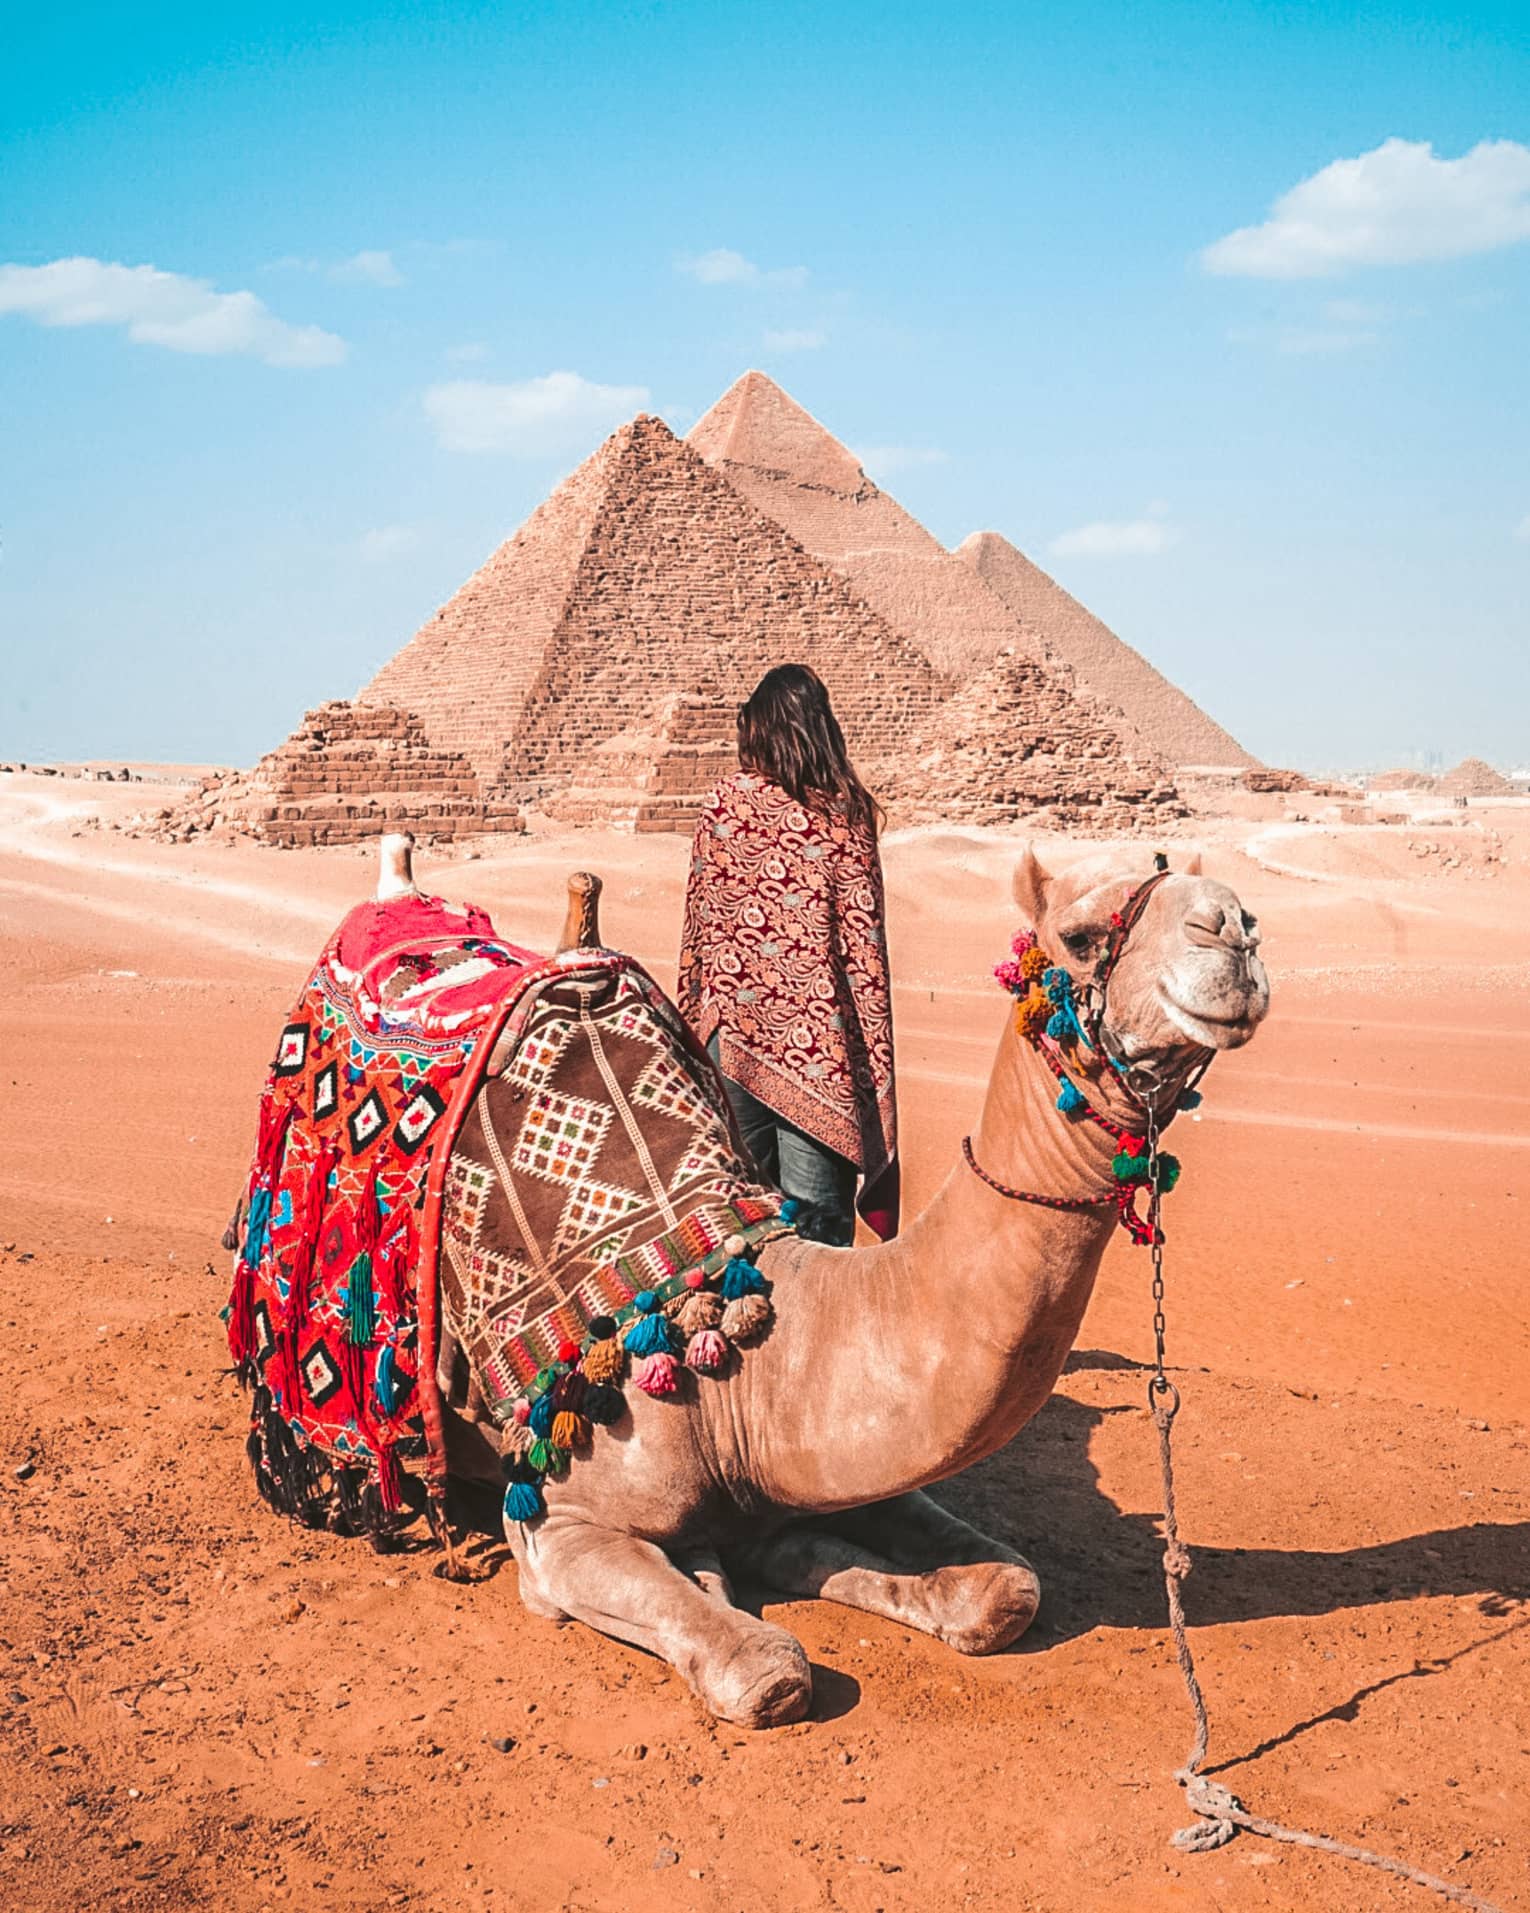 A woman behind a camel covered in colourful blankets looking at pyramids in the distance.